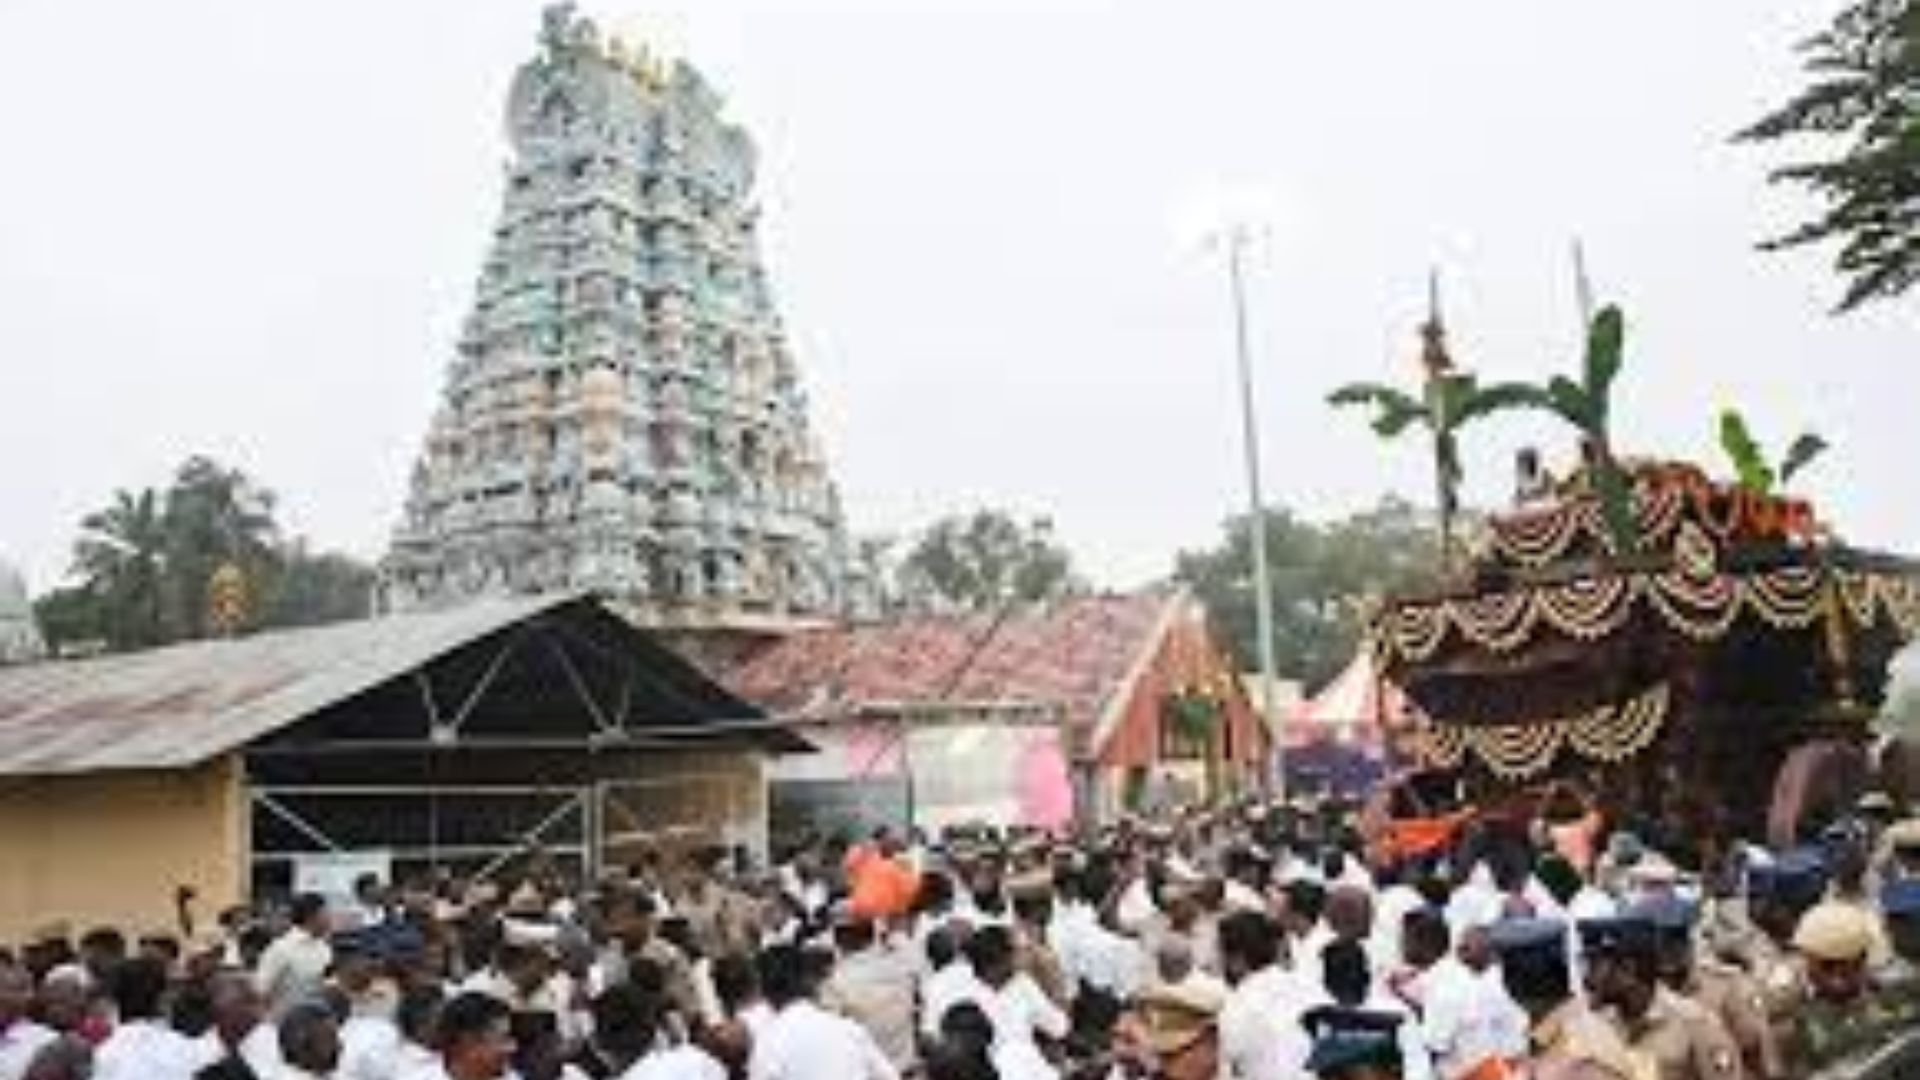 Highly anticipated event Kandadevi temple car procession held after 17 years